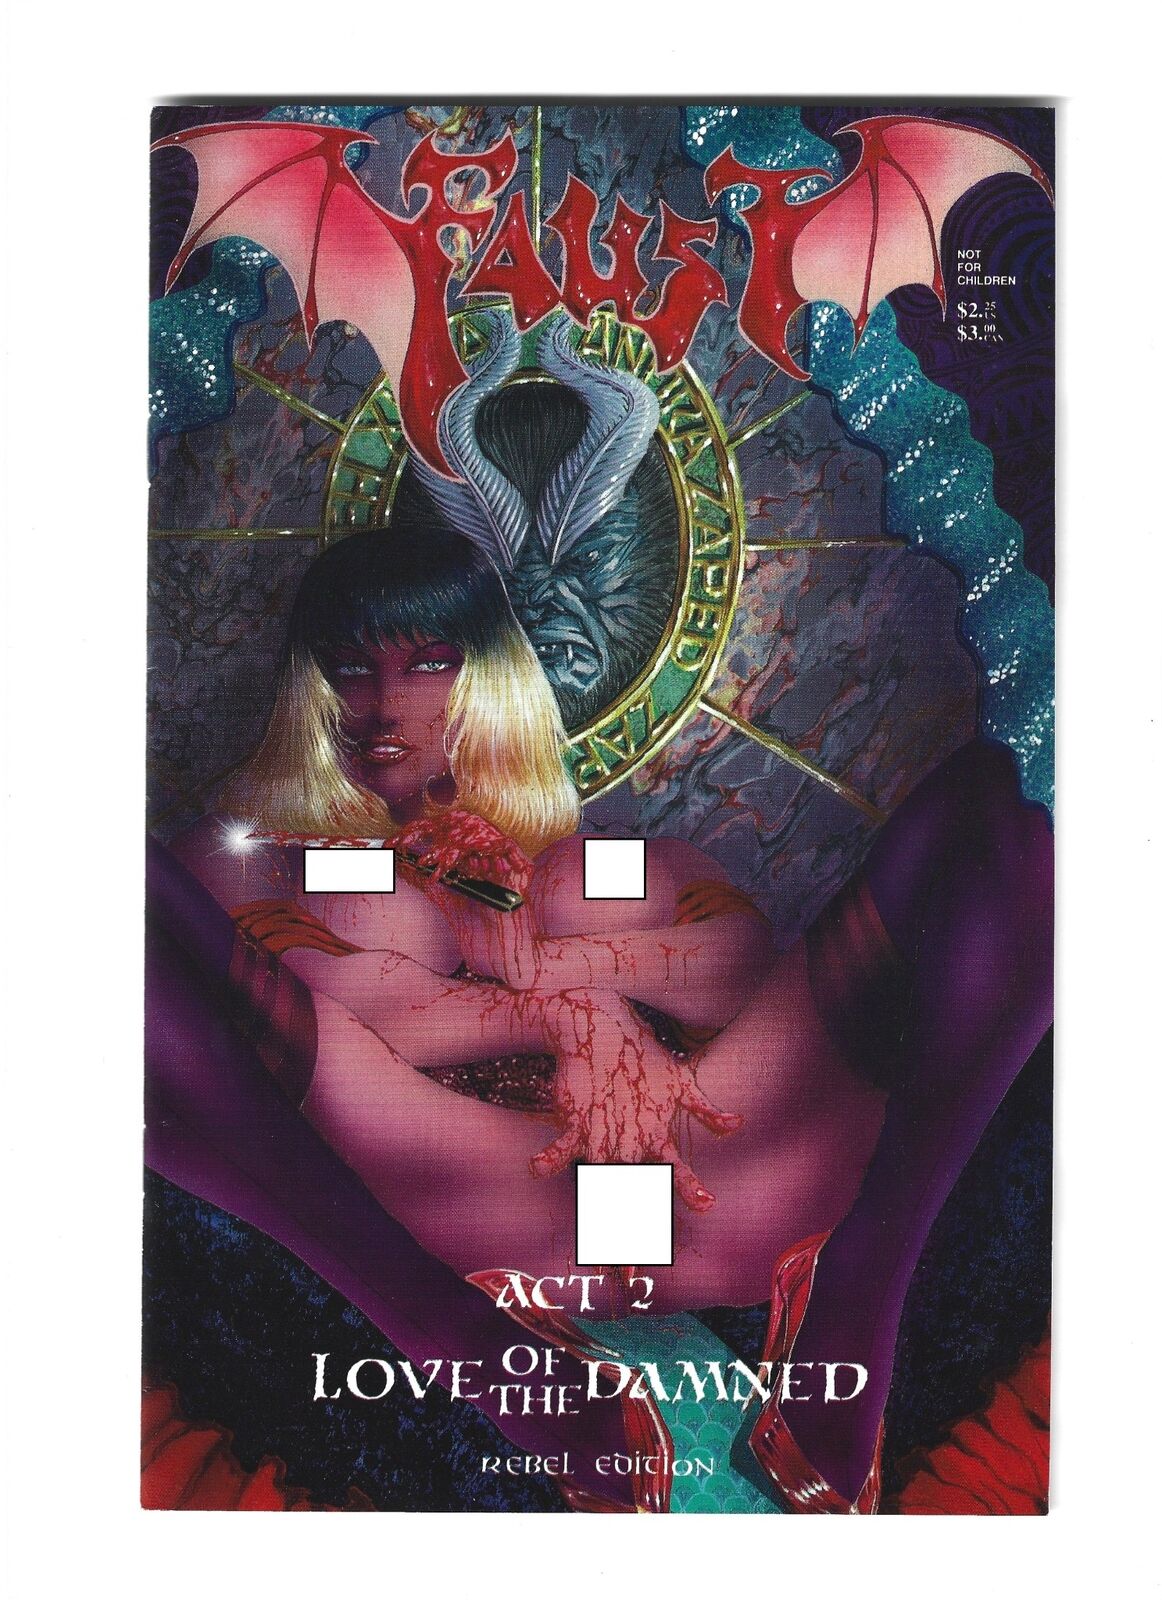 Faust #2 Love of the Damned Act 2 Rebel Edition VF/NM (LF006)